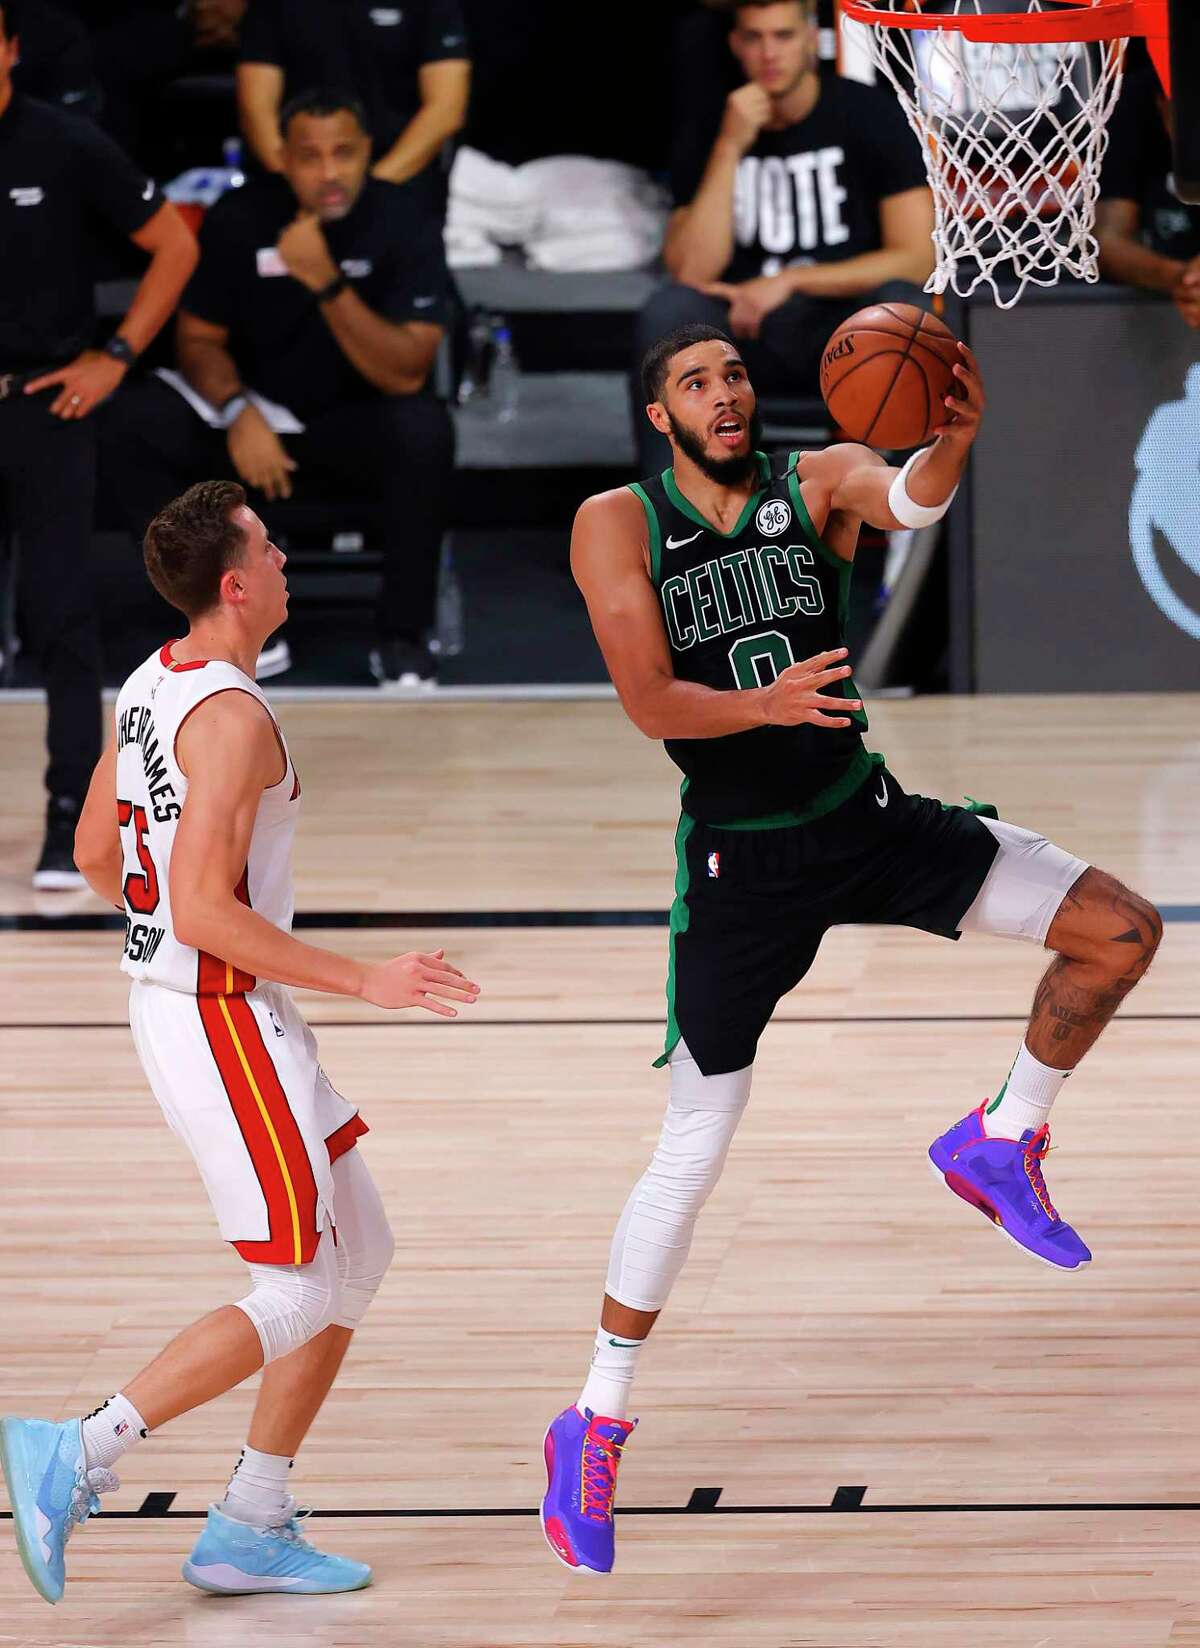 LAKE BUENA VISTA, FLORIDA - SEPTEMBER 25: Jayson Tatum #0 of the Boston Celtics goes for a lay-up against Duncan Robinson #55 of the Miami Heat during the fourth quarter in Game Five of the Eastern Conference Finals during the 2020 NBA Playoffs at AdventHealth Arena at the ESPN Wide World Of Sports Complex on September 25, 2020 in Lake Buena Vista, Florida. NOTE TO USER: User expressly acknowledges and agrees that, by downloading and or using this photograph, User is consenting to the terms and conditions of the Getty Images License Agreement. (Photo by Mike Ehrmann/Getty Images)